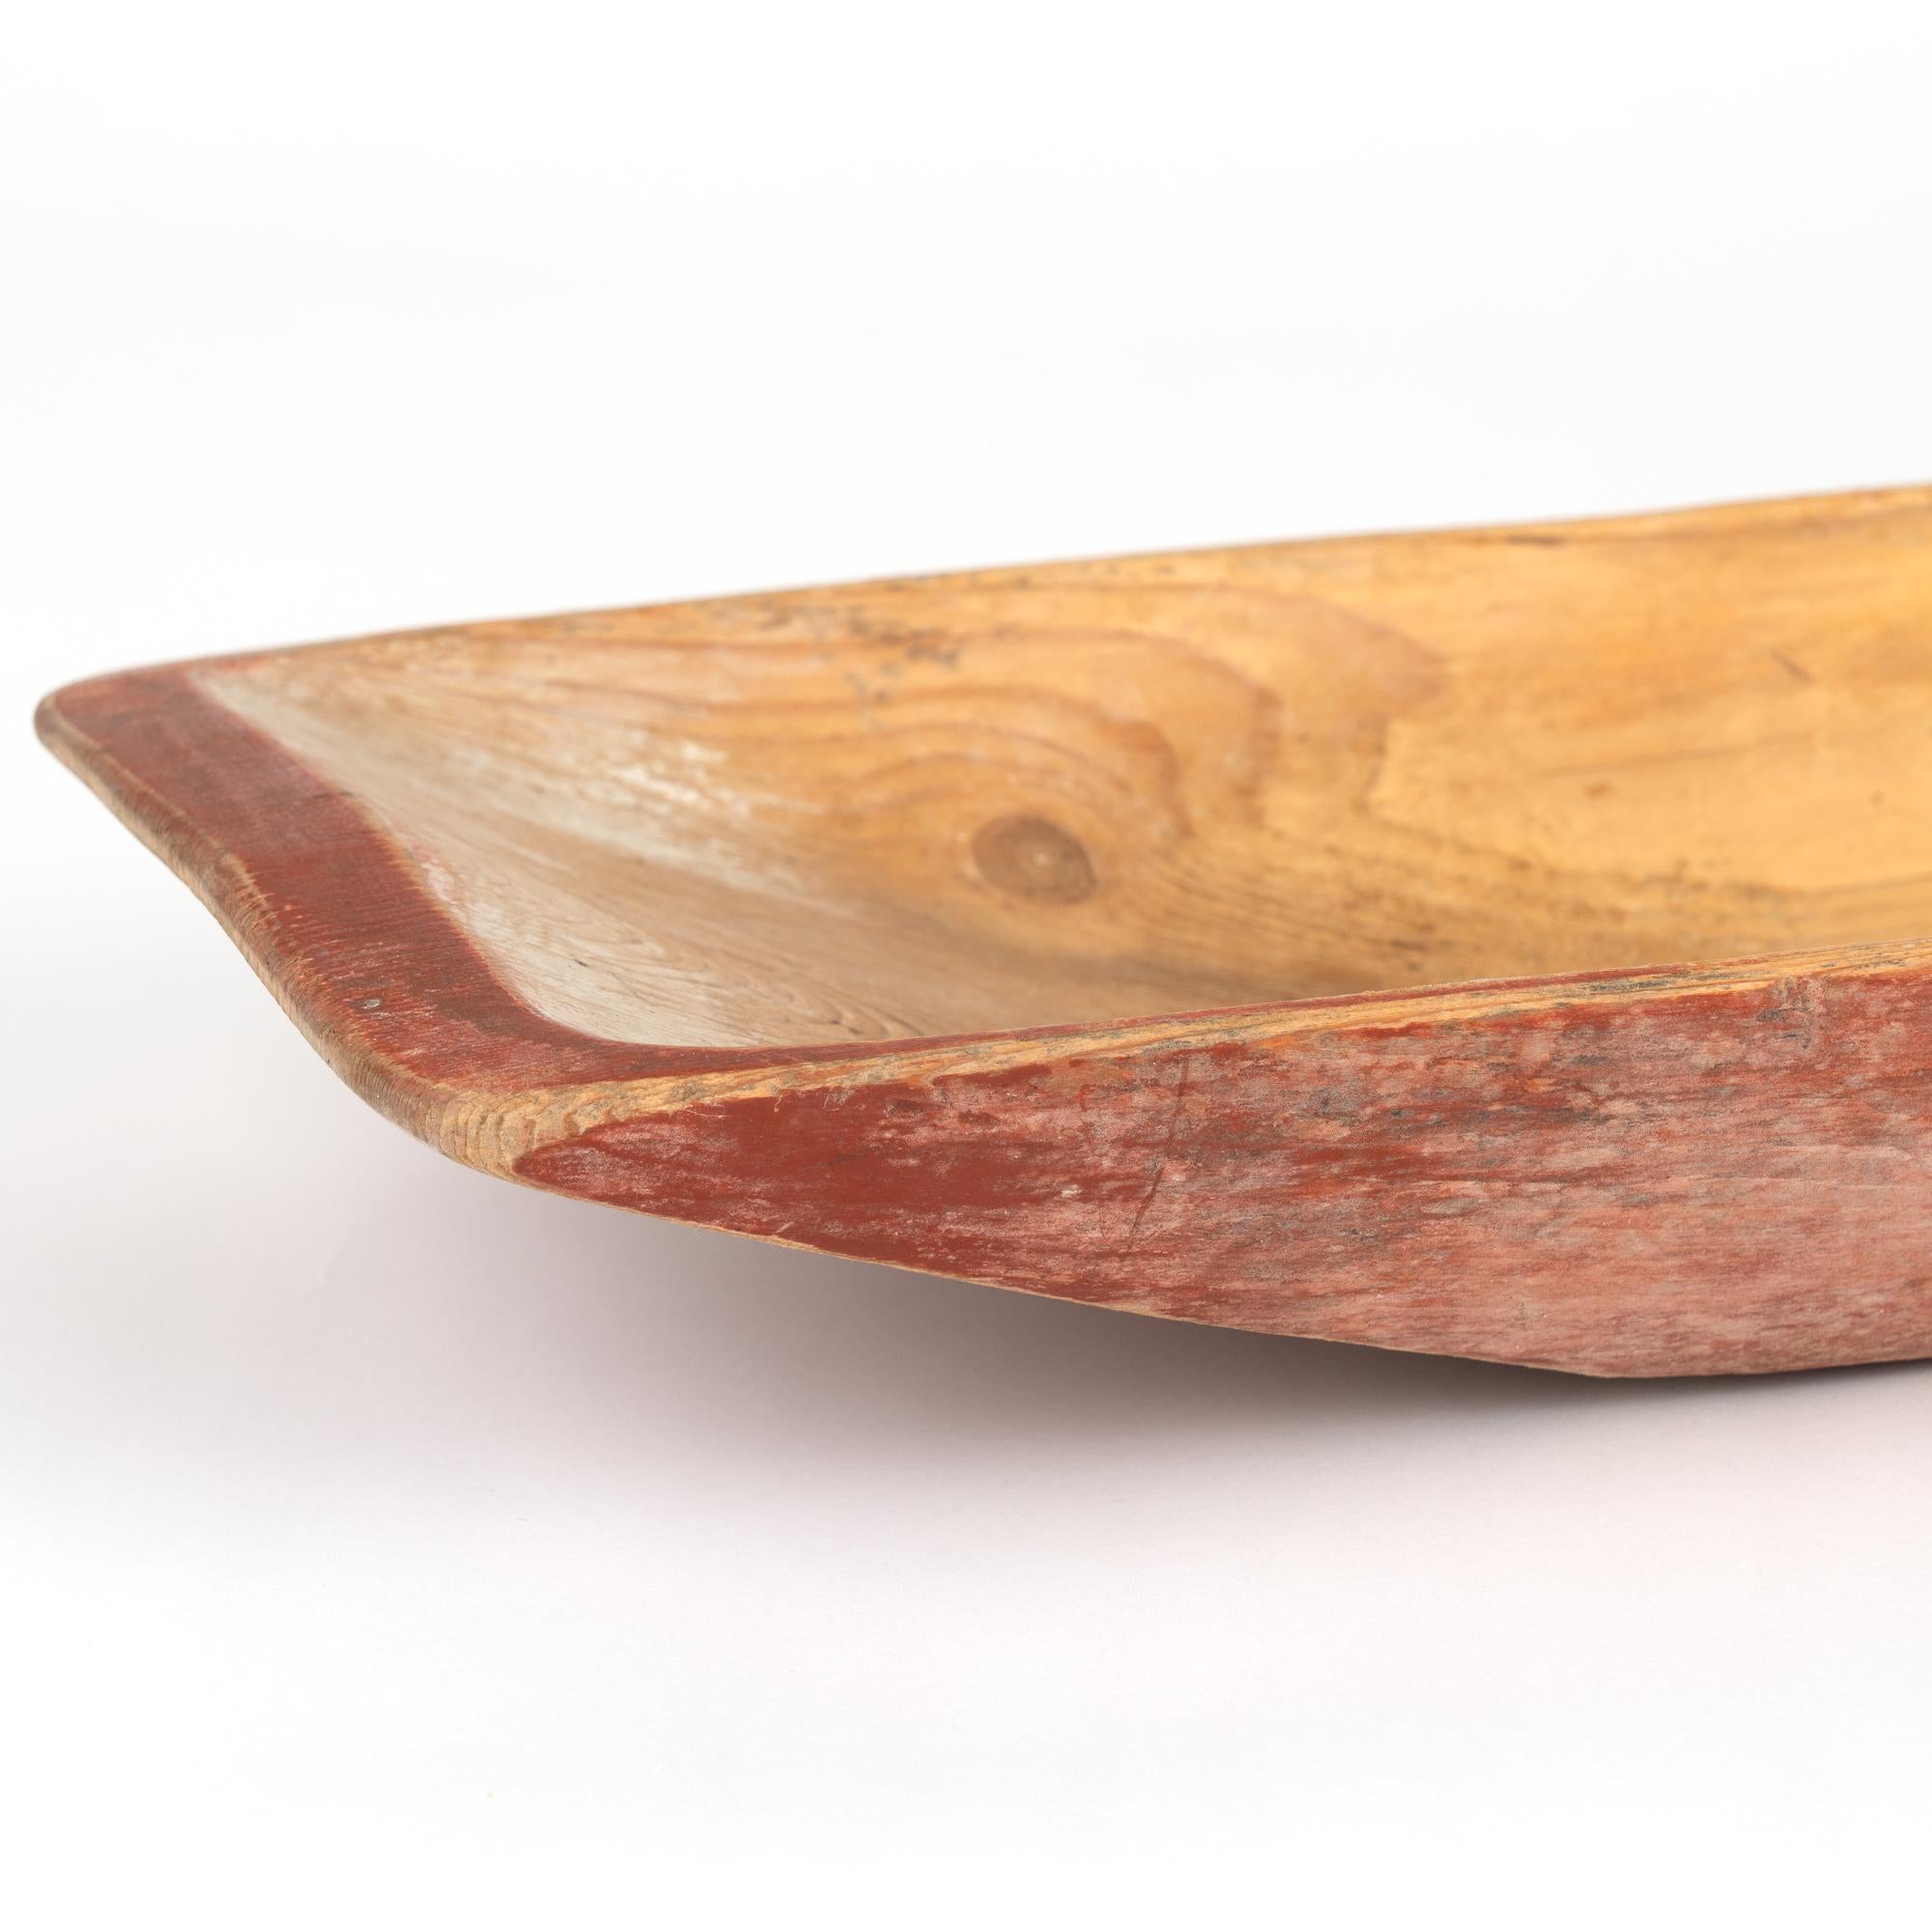 Original Red Painted Carved Pine Wooden Bowl, Sweden circa 1880 For Sale 1